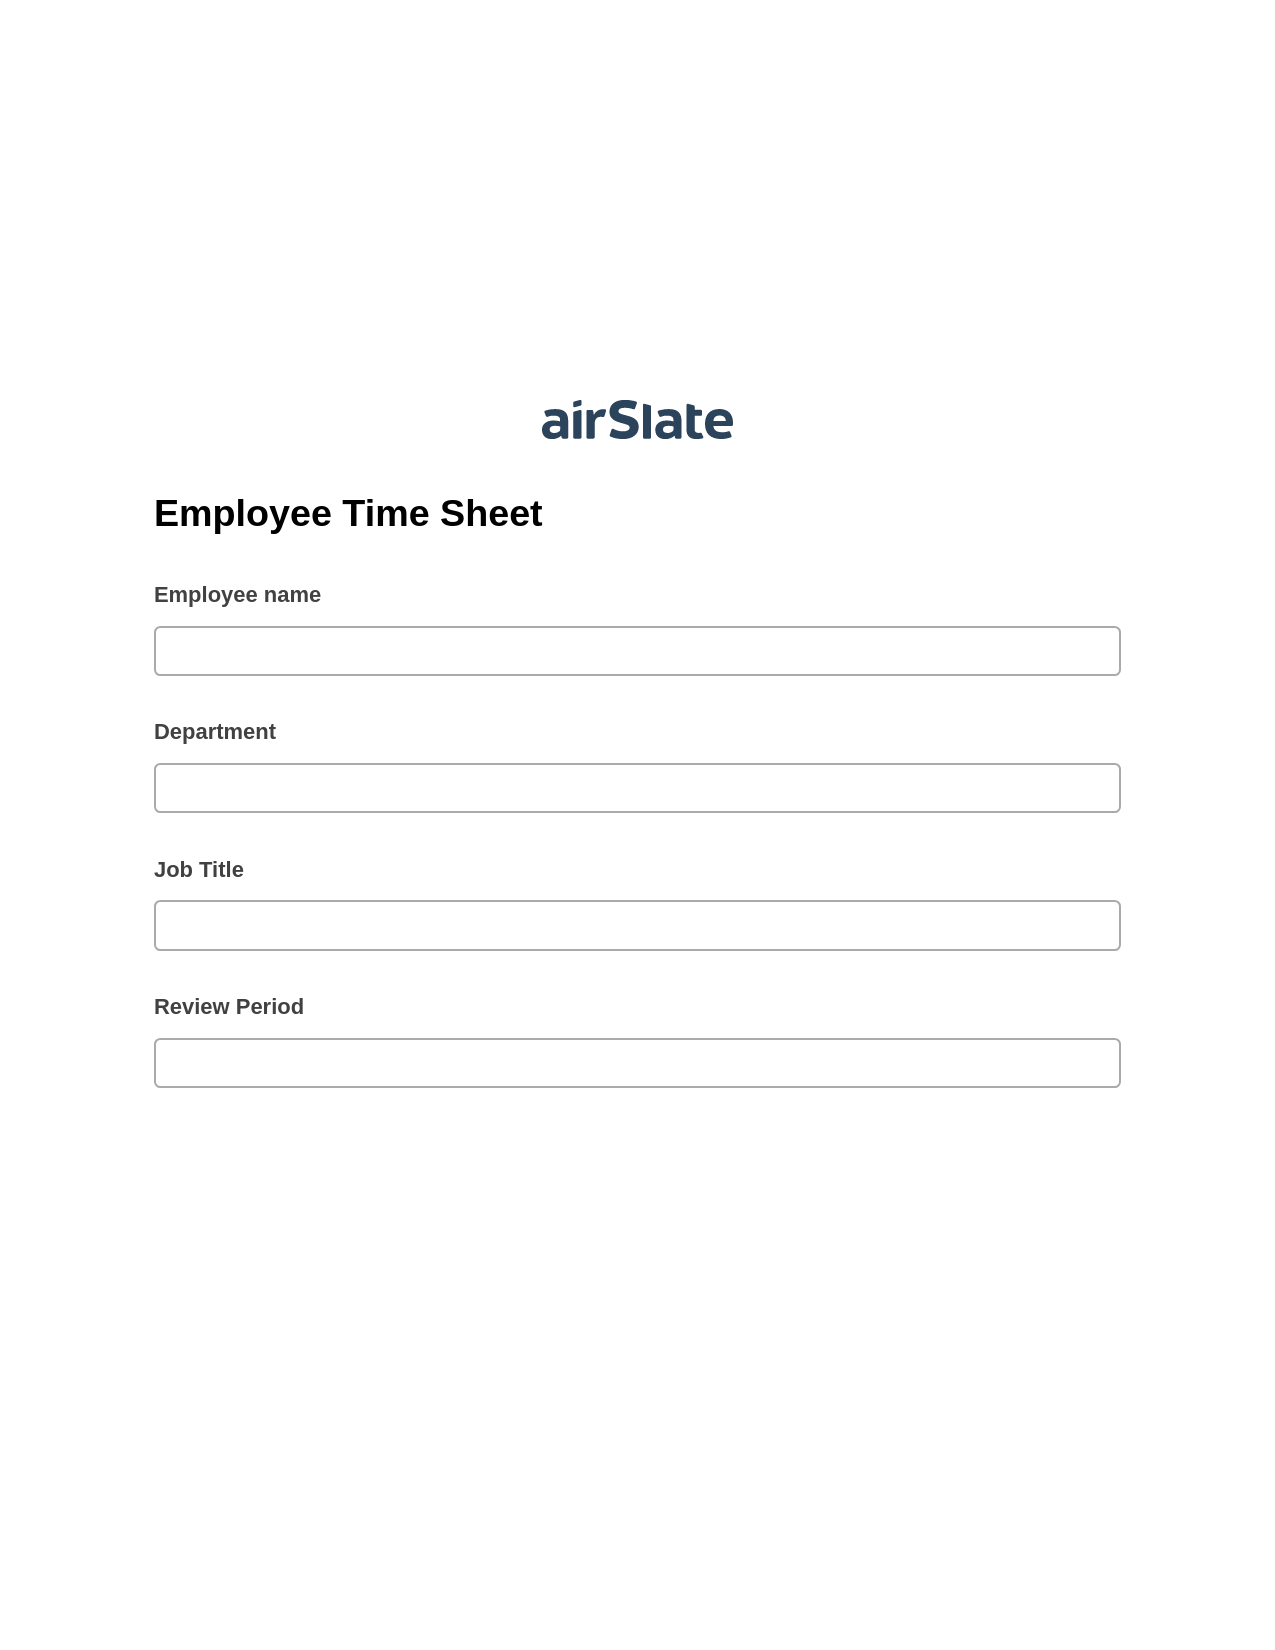 Employee Time Sheet Pre-fill from MySQL Bot, Create slate addon, Export to NetSuite Bot